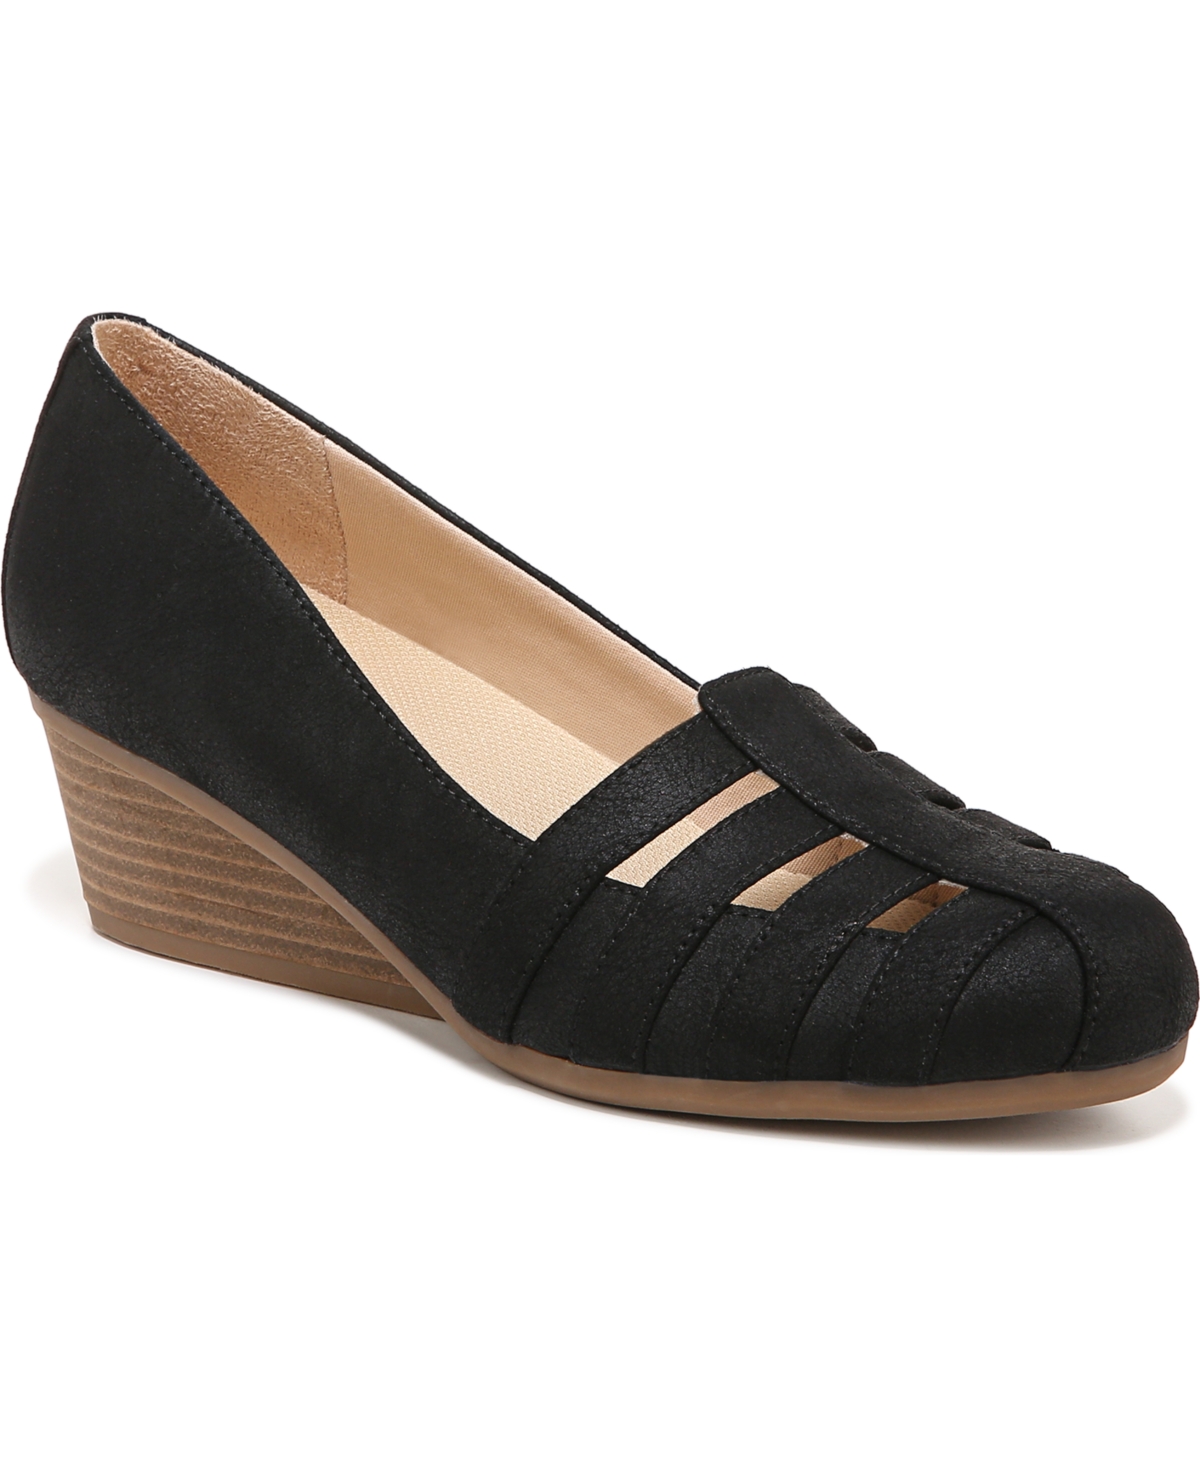 Dr. Scholl's Be Free Wedge Pump In Black